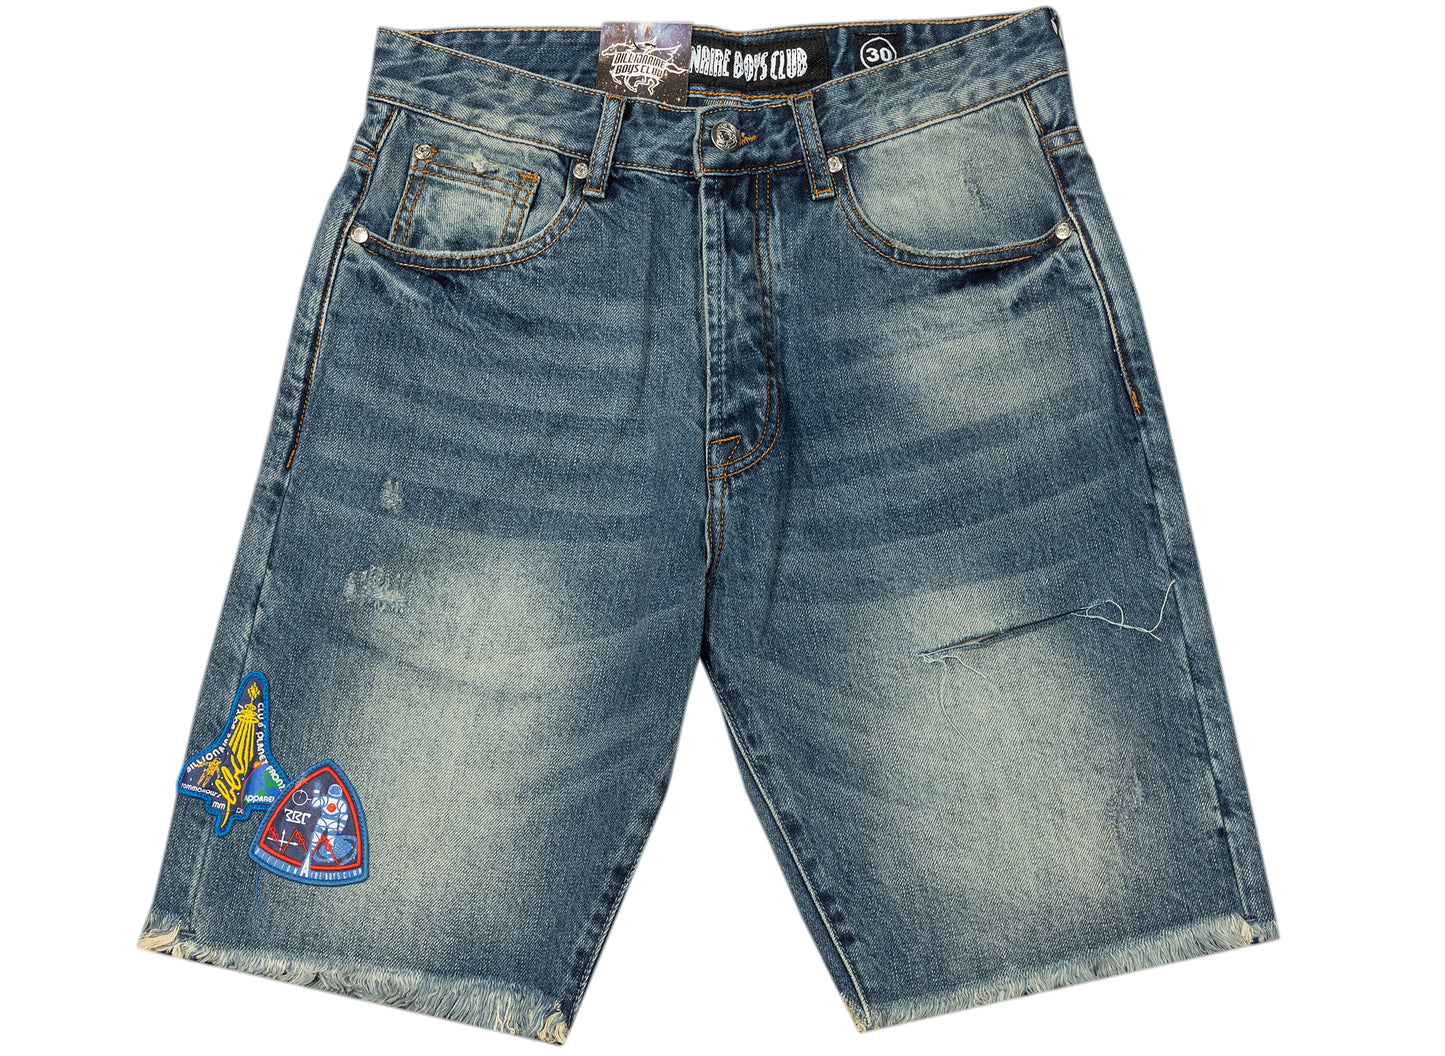 BBC Expedition Jeans Shorts